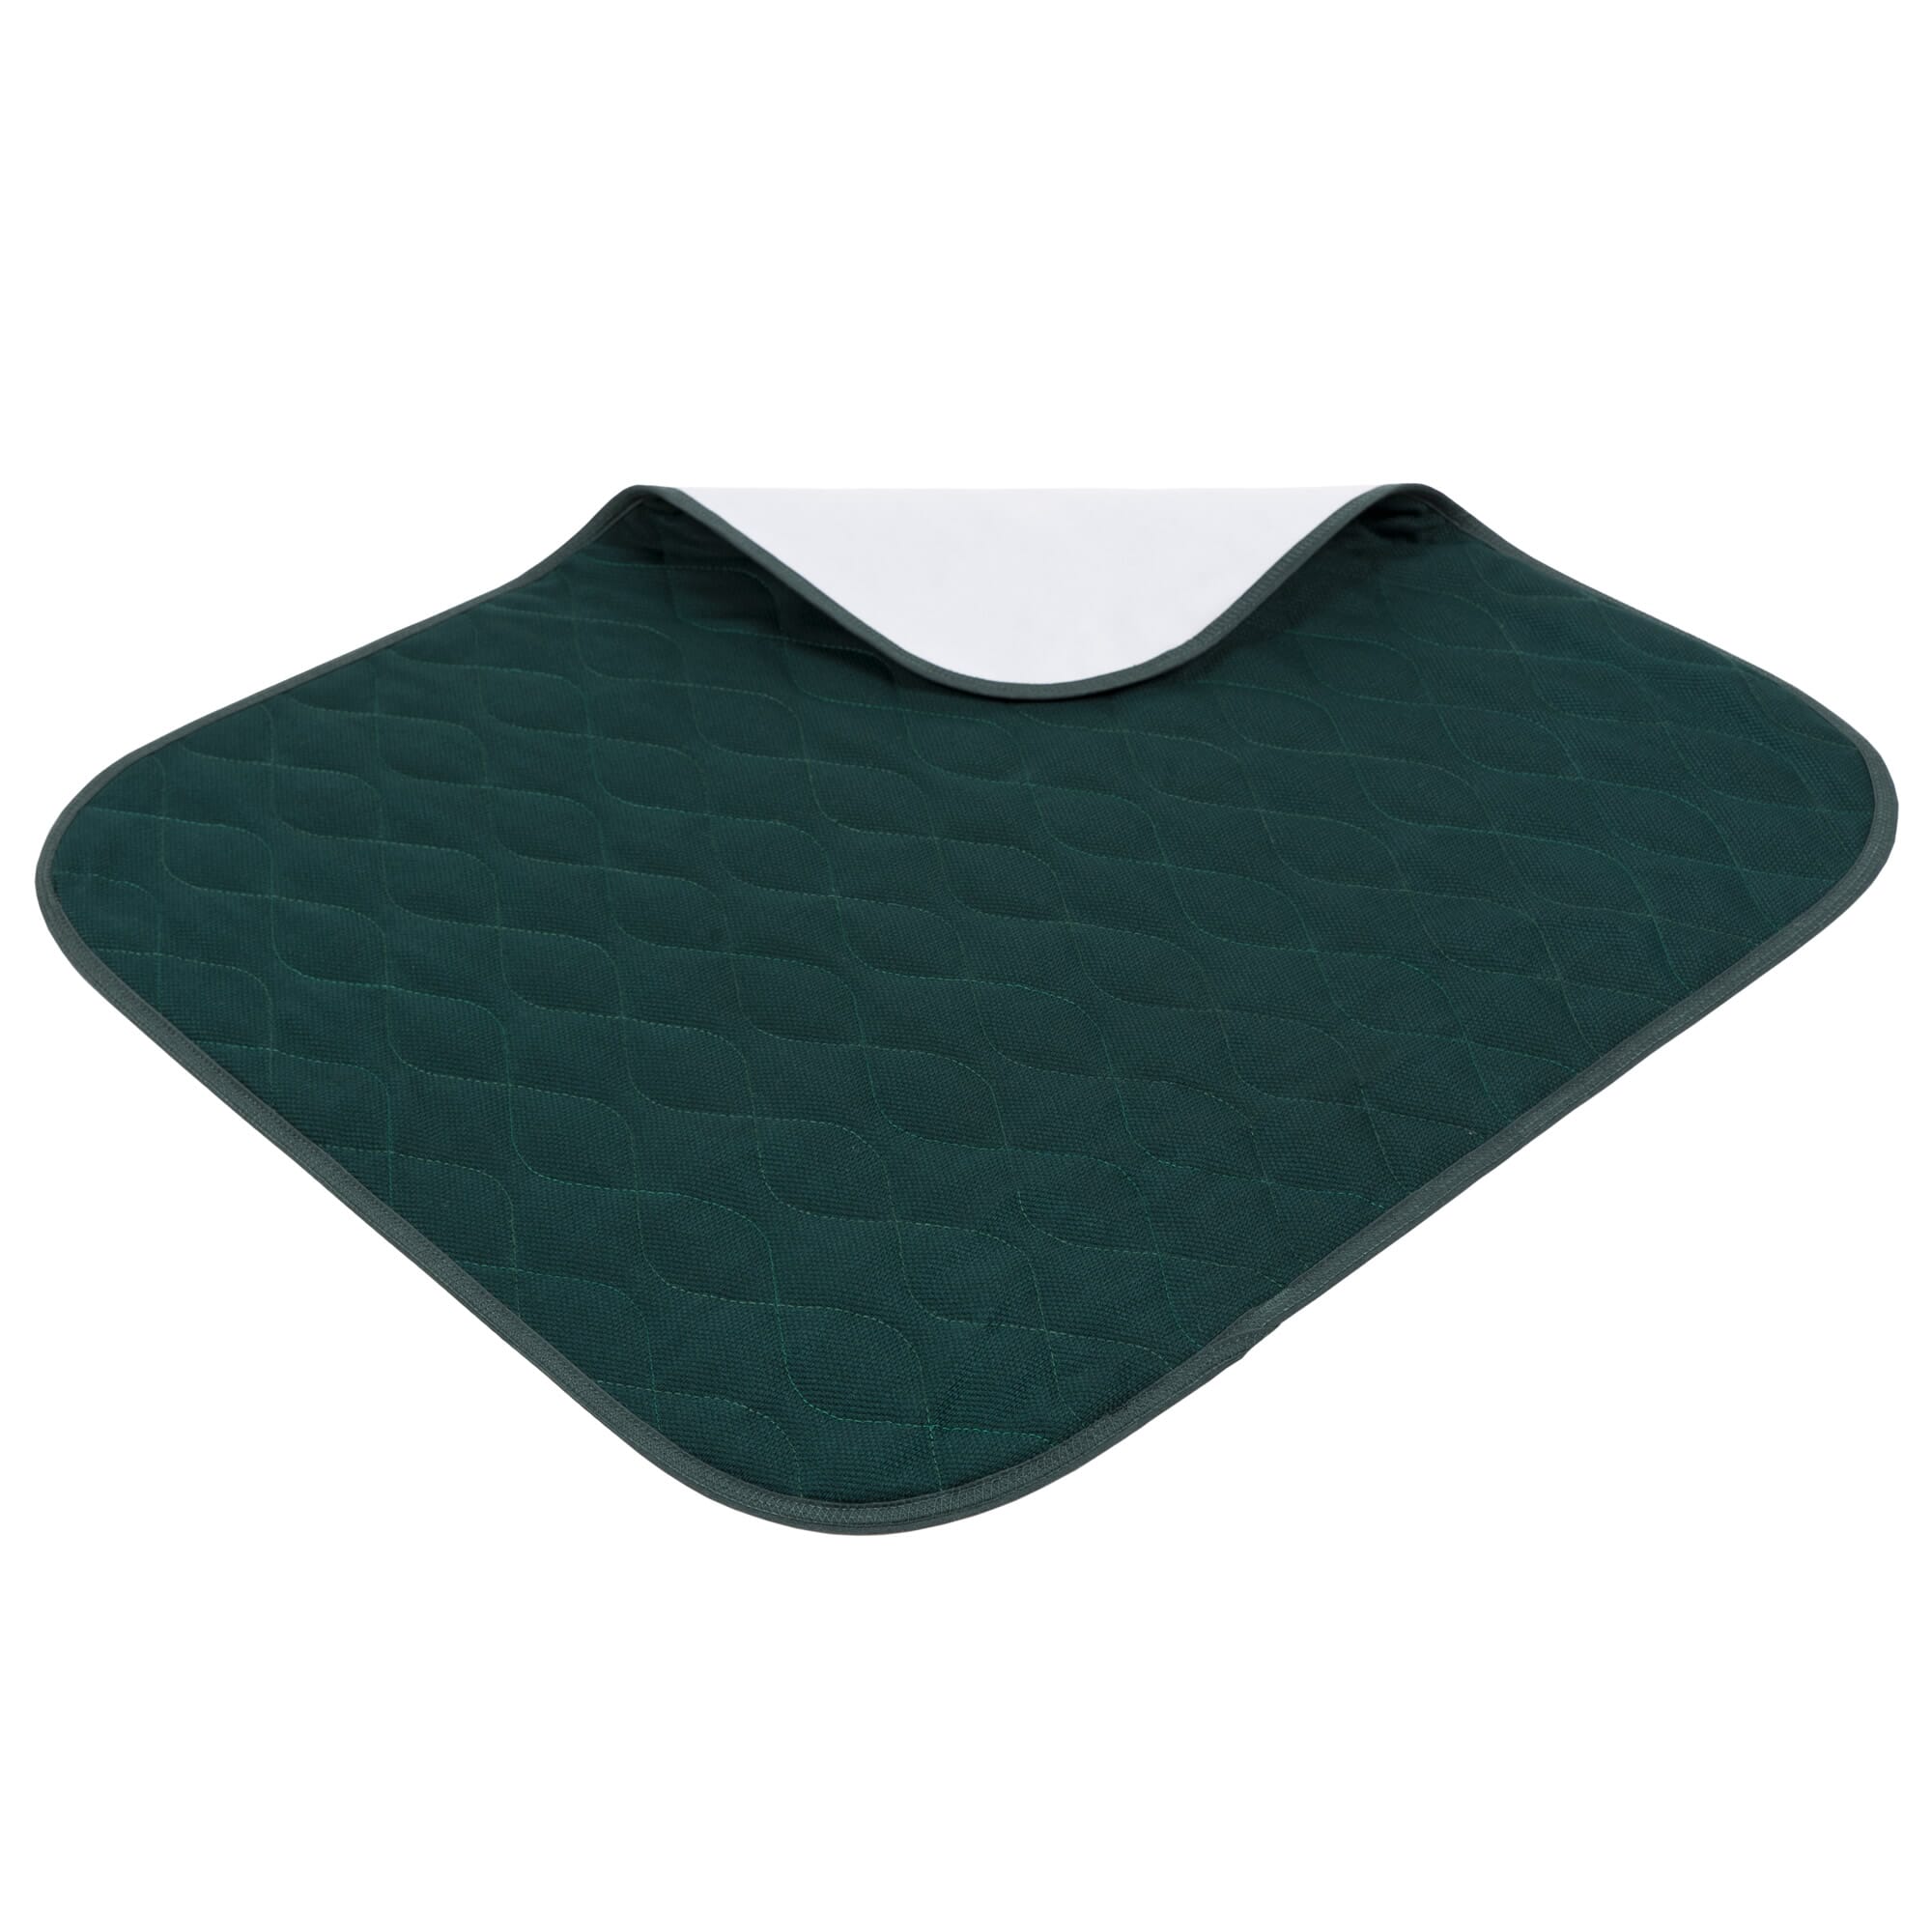 View Economy Chair Pad Green information